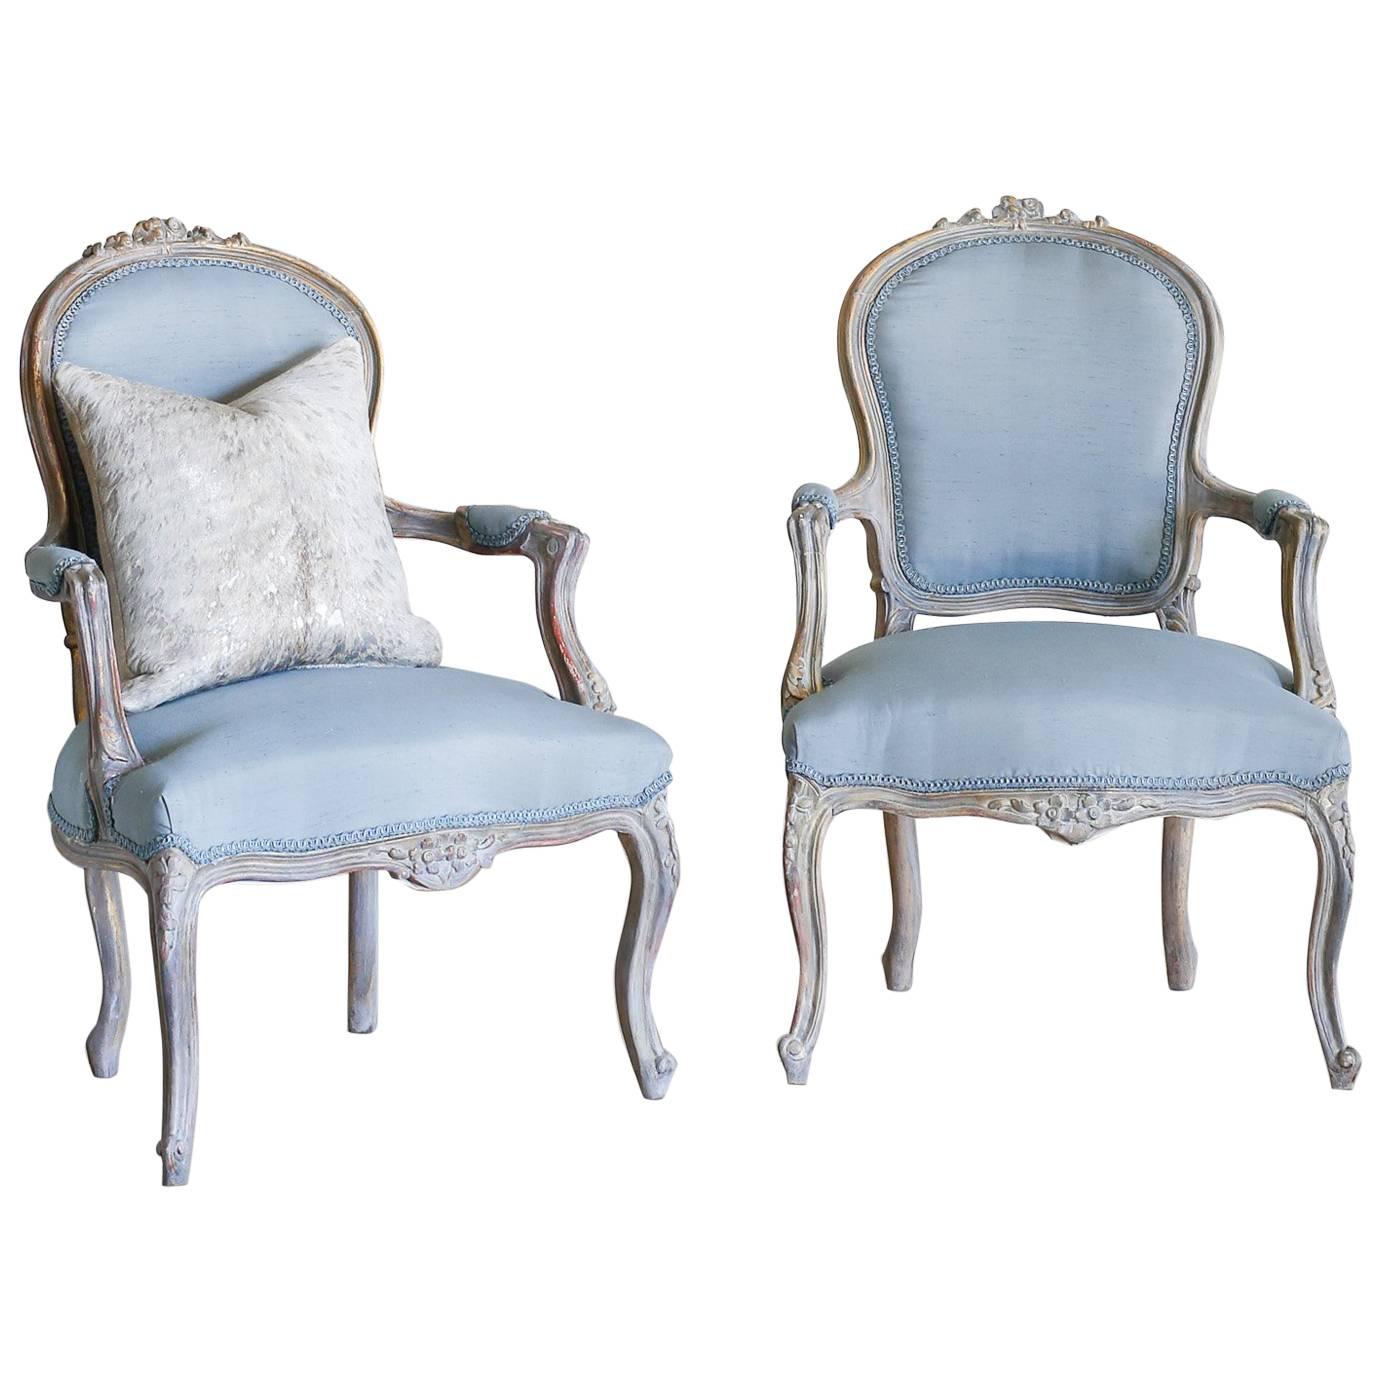 Pair of Vintage Armchairs in Blue Silk: 1940 For Sale